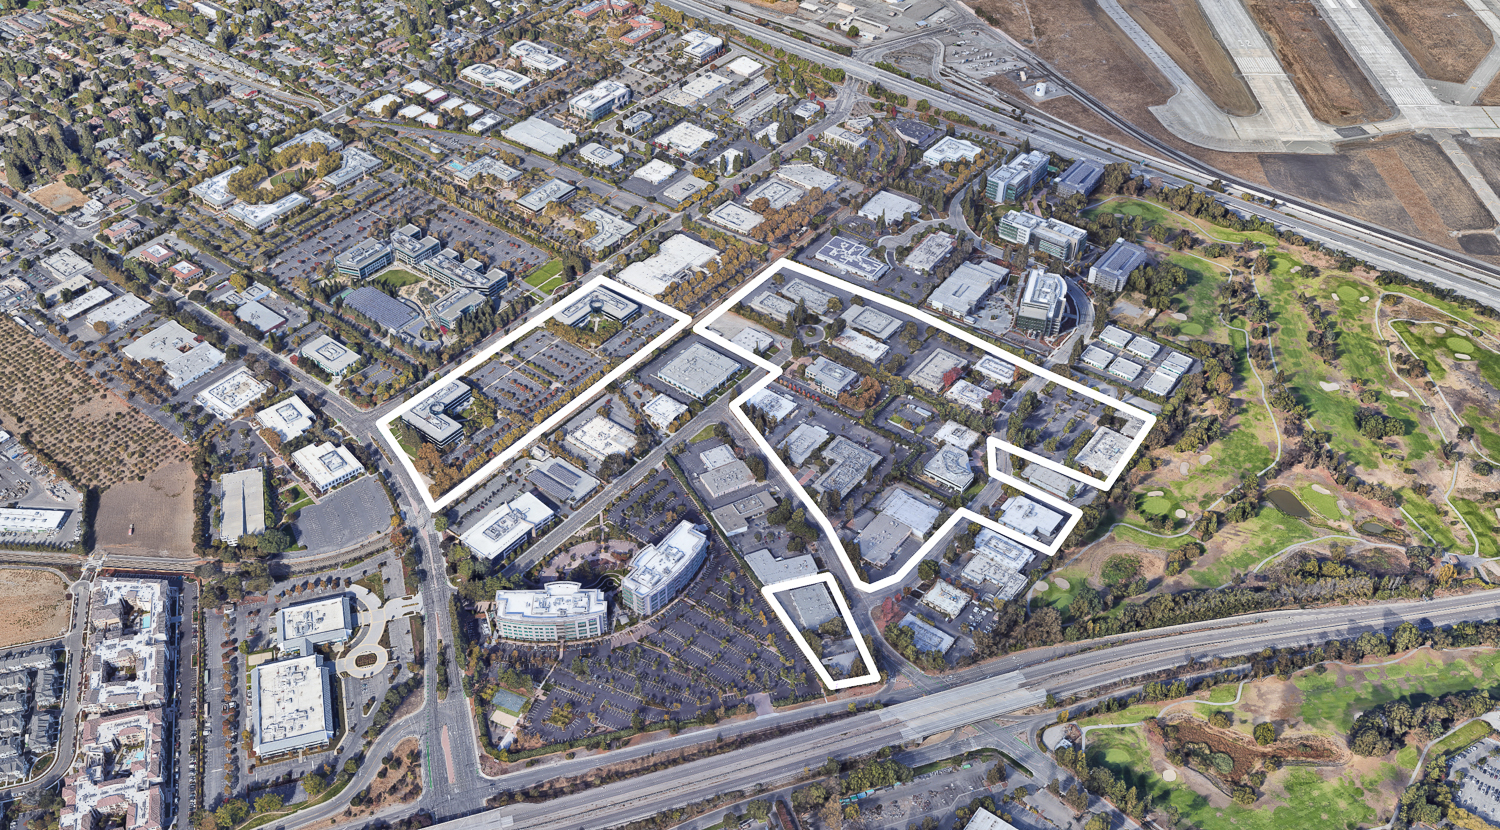 Middlefield Park site map approximately outlined by SF YIMBY, image via Google Satellite